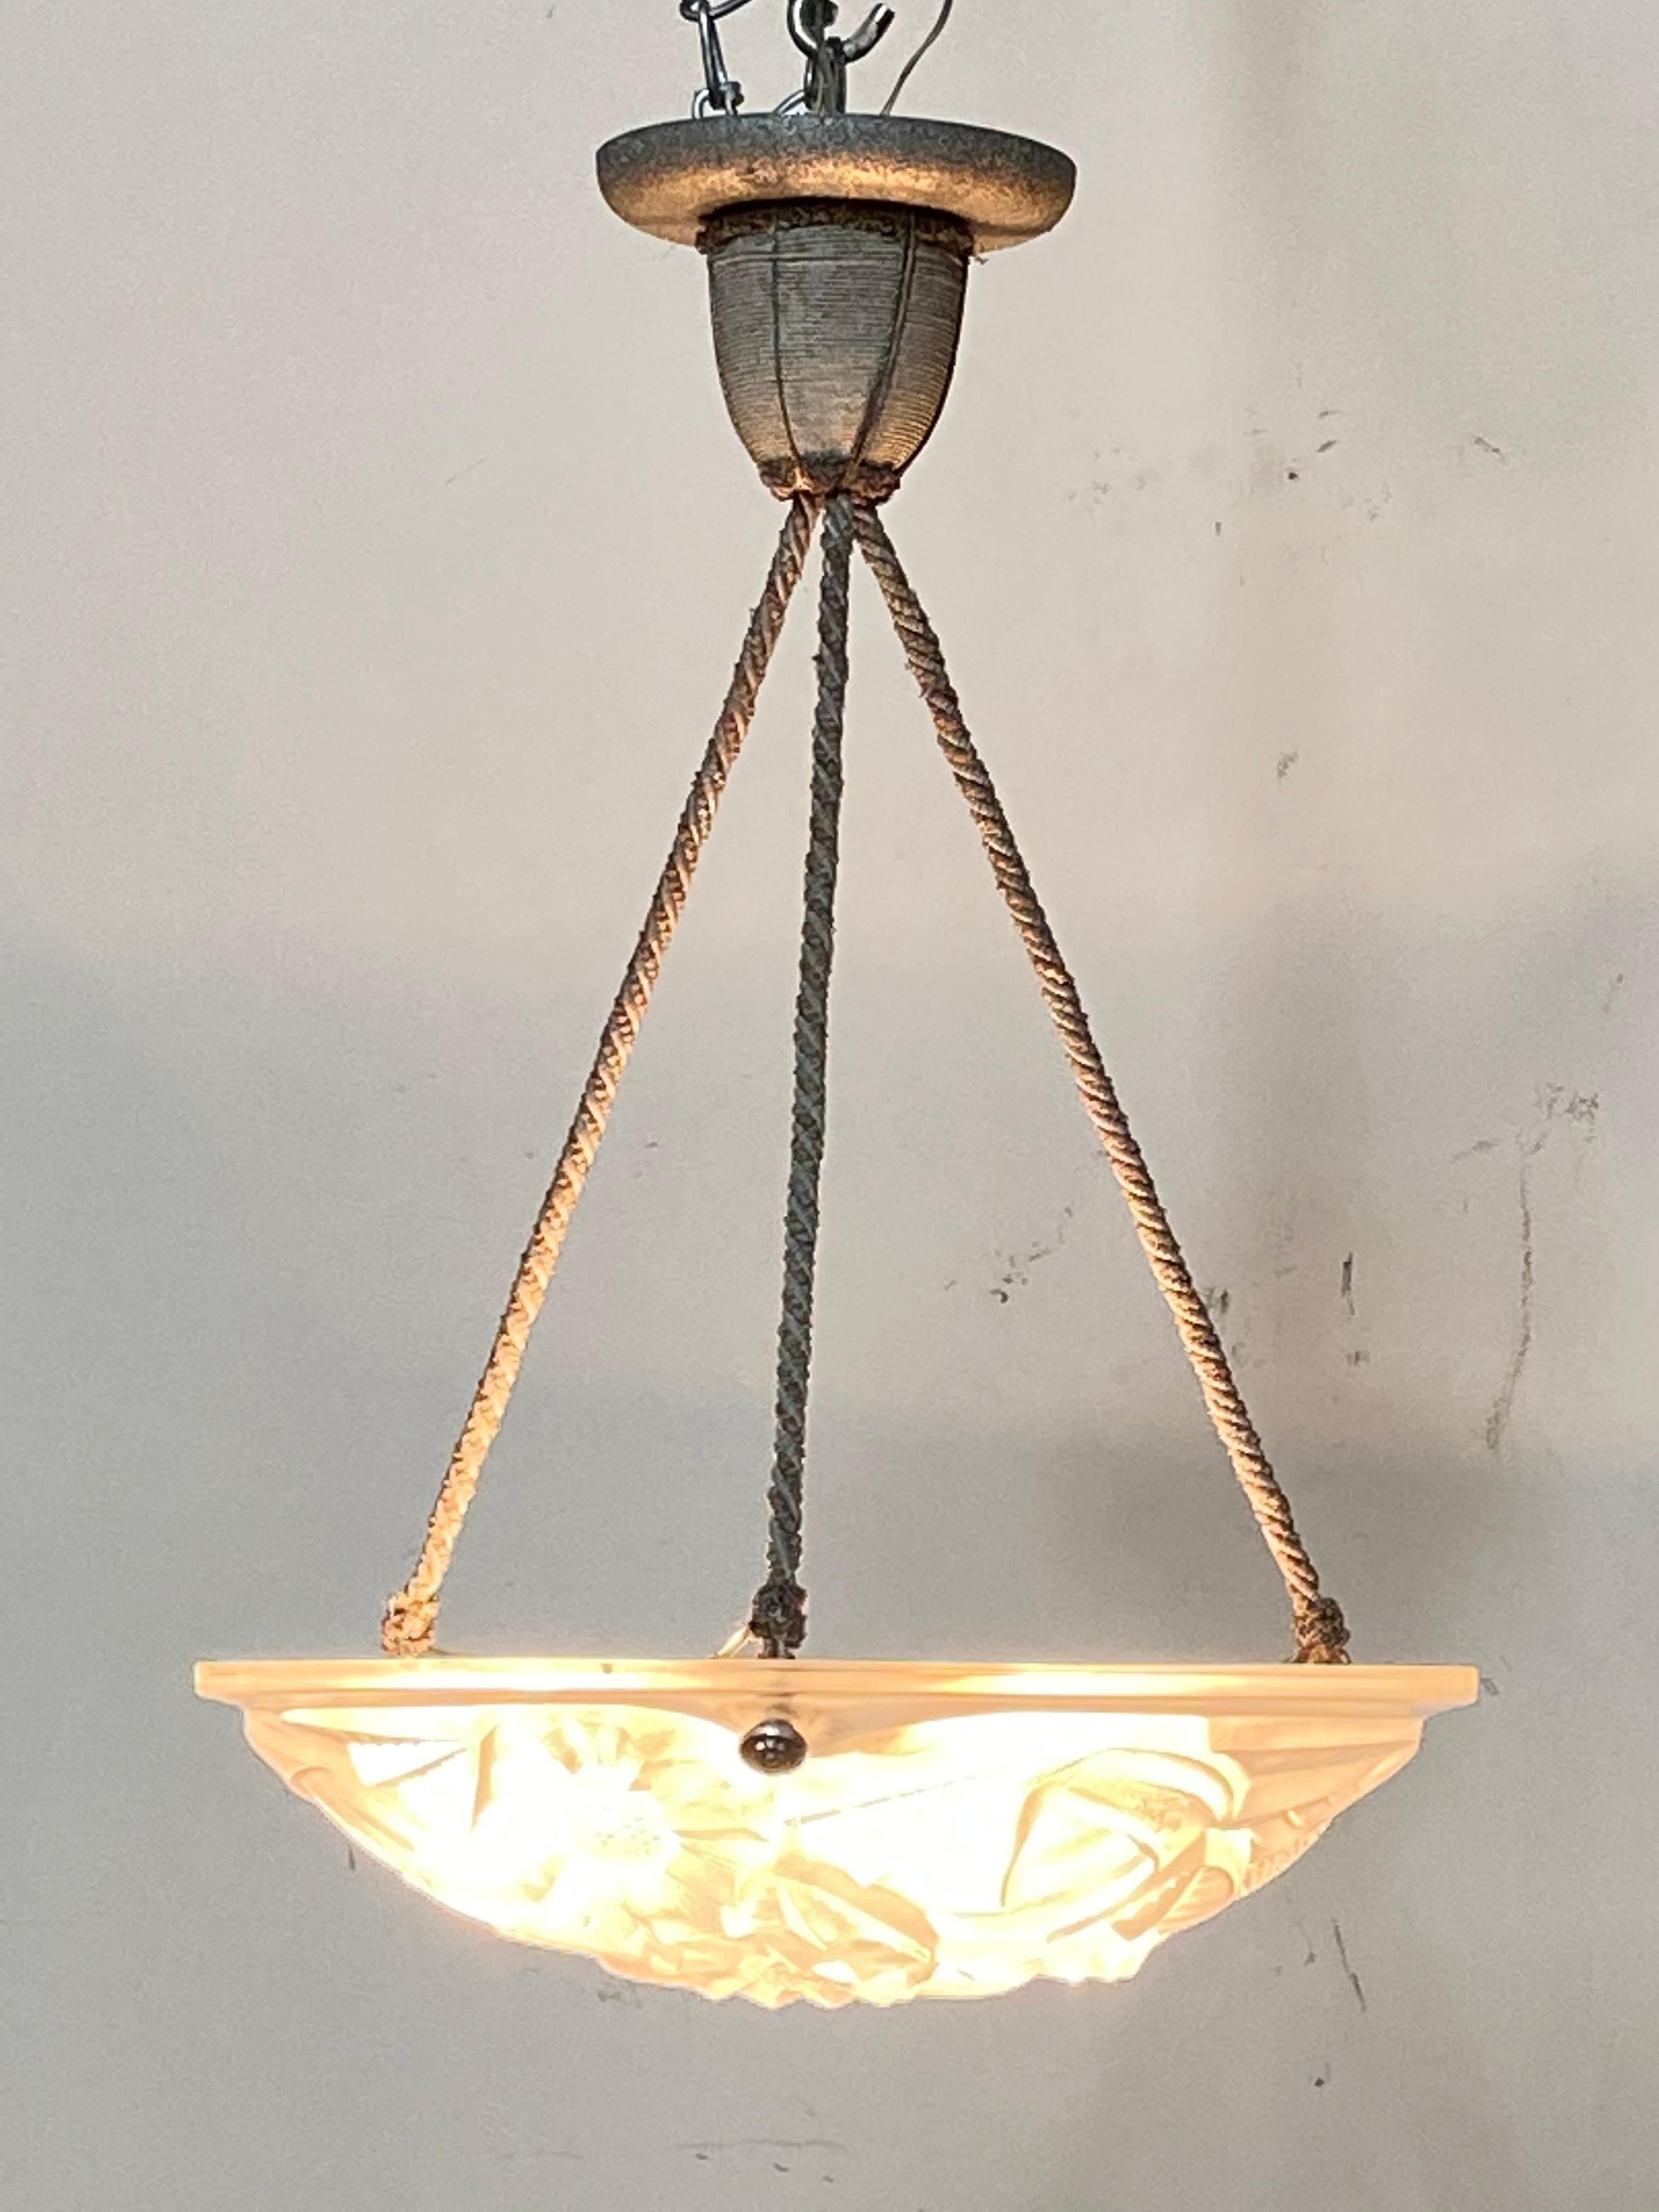 Antique French Art Deco (circa 1925) frosted glass ceiling fixture with original braided fabric hanger in good condition. Shows minor signs of wear., but works perfectly. The fixture is shown with high wattage bulbs. We would recommend lower